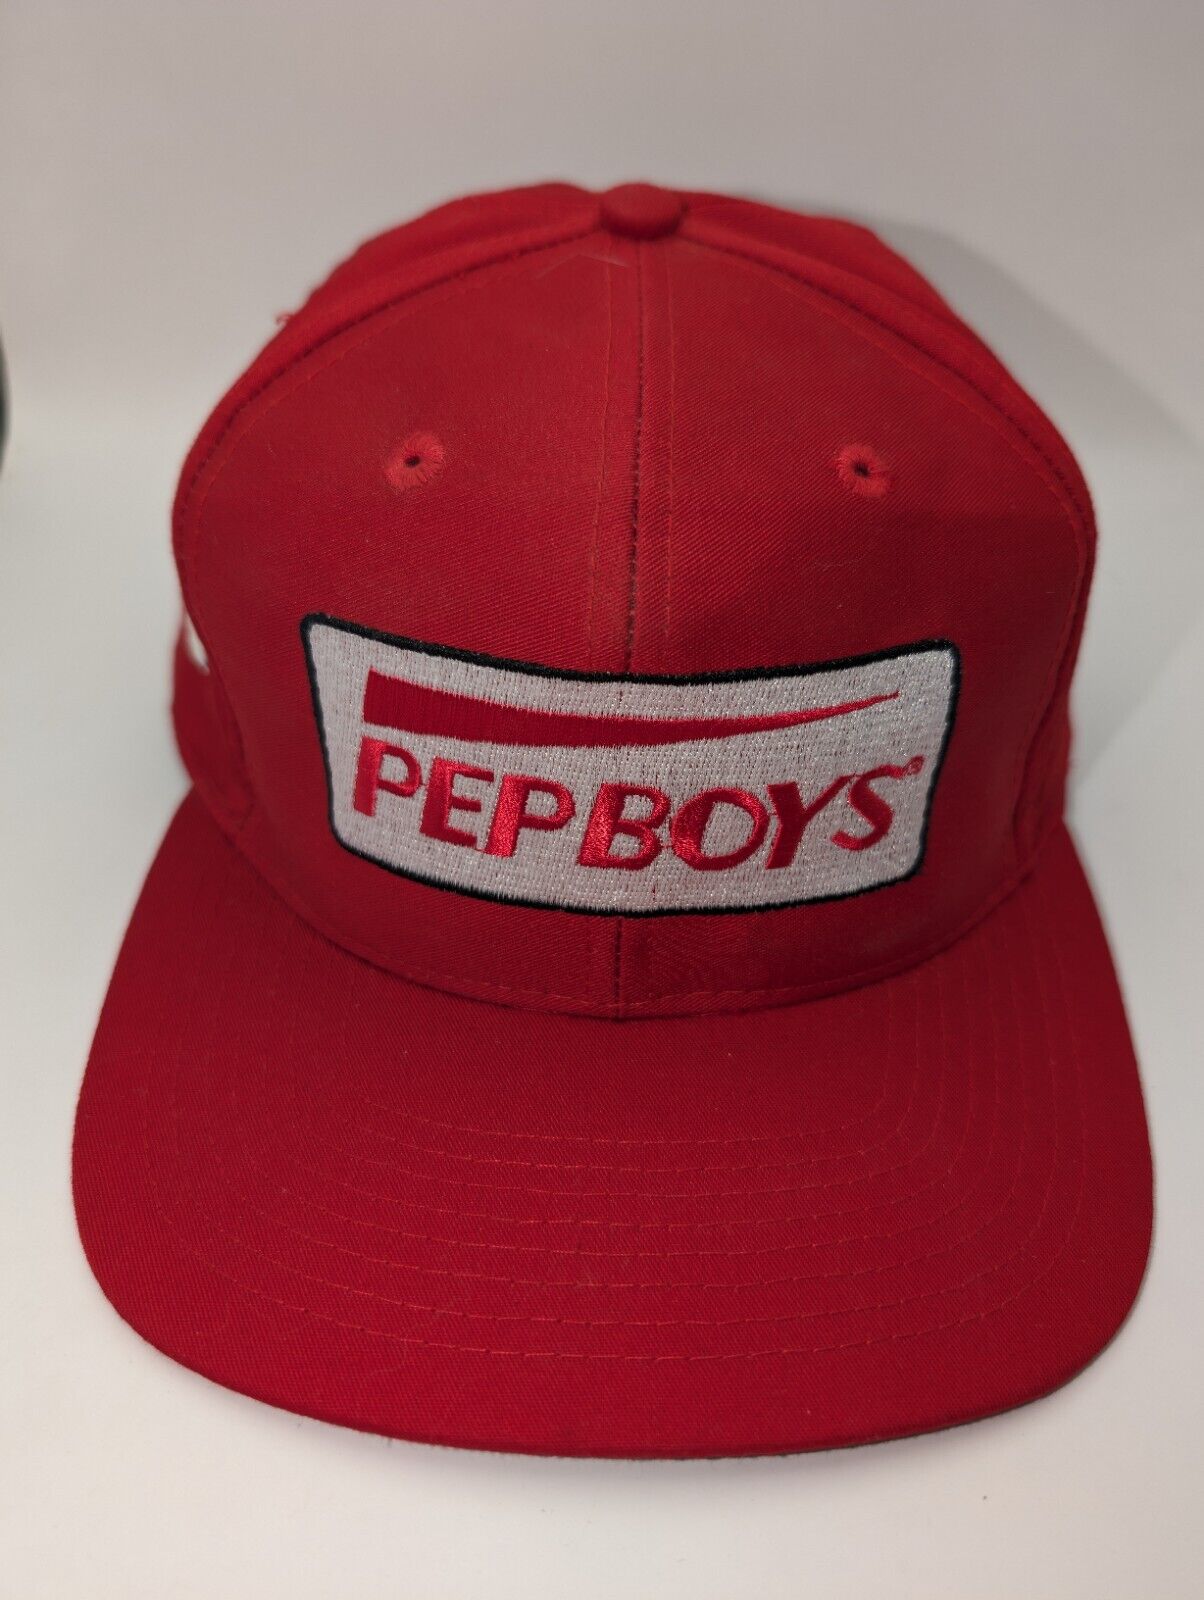 Pepboys Hat Red Snapback Indy Car Indy Racing Lea… - image 1